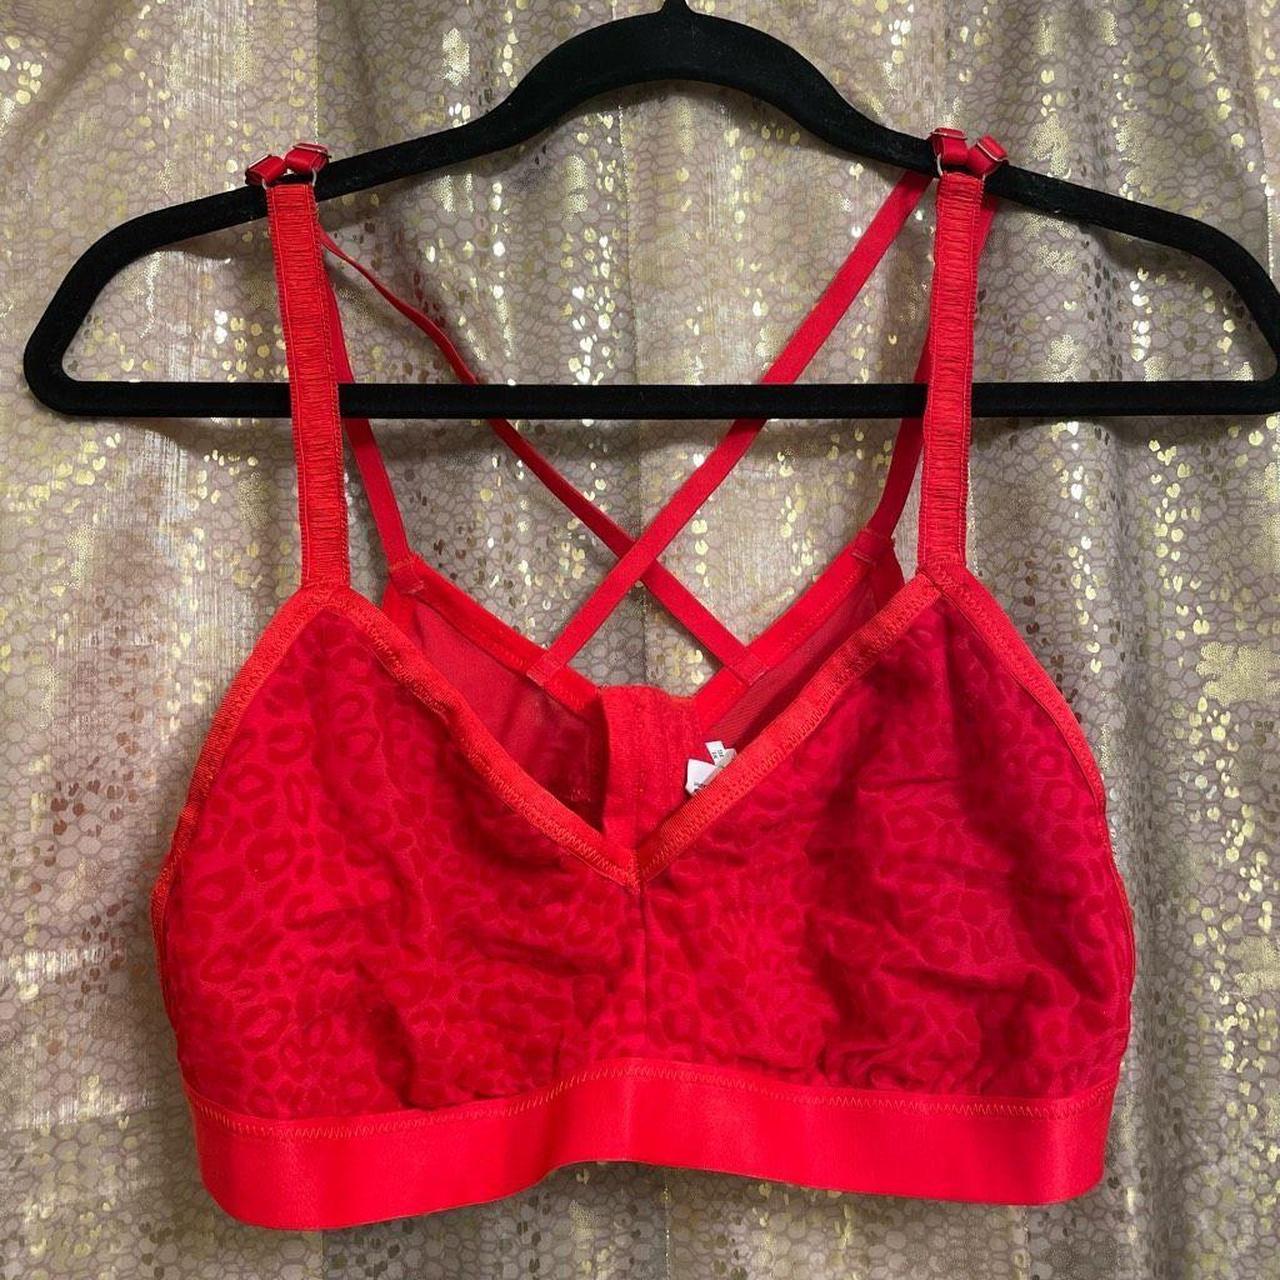 Aerie red lace bralette, size medium, new with tags